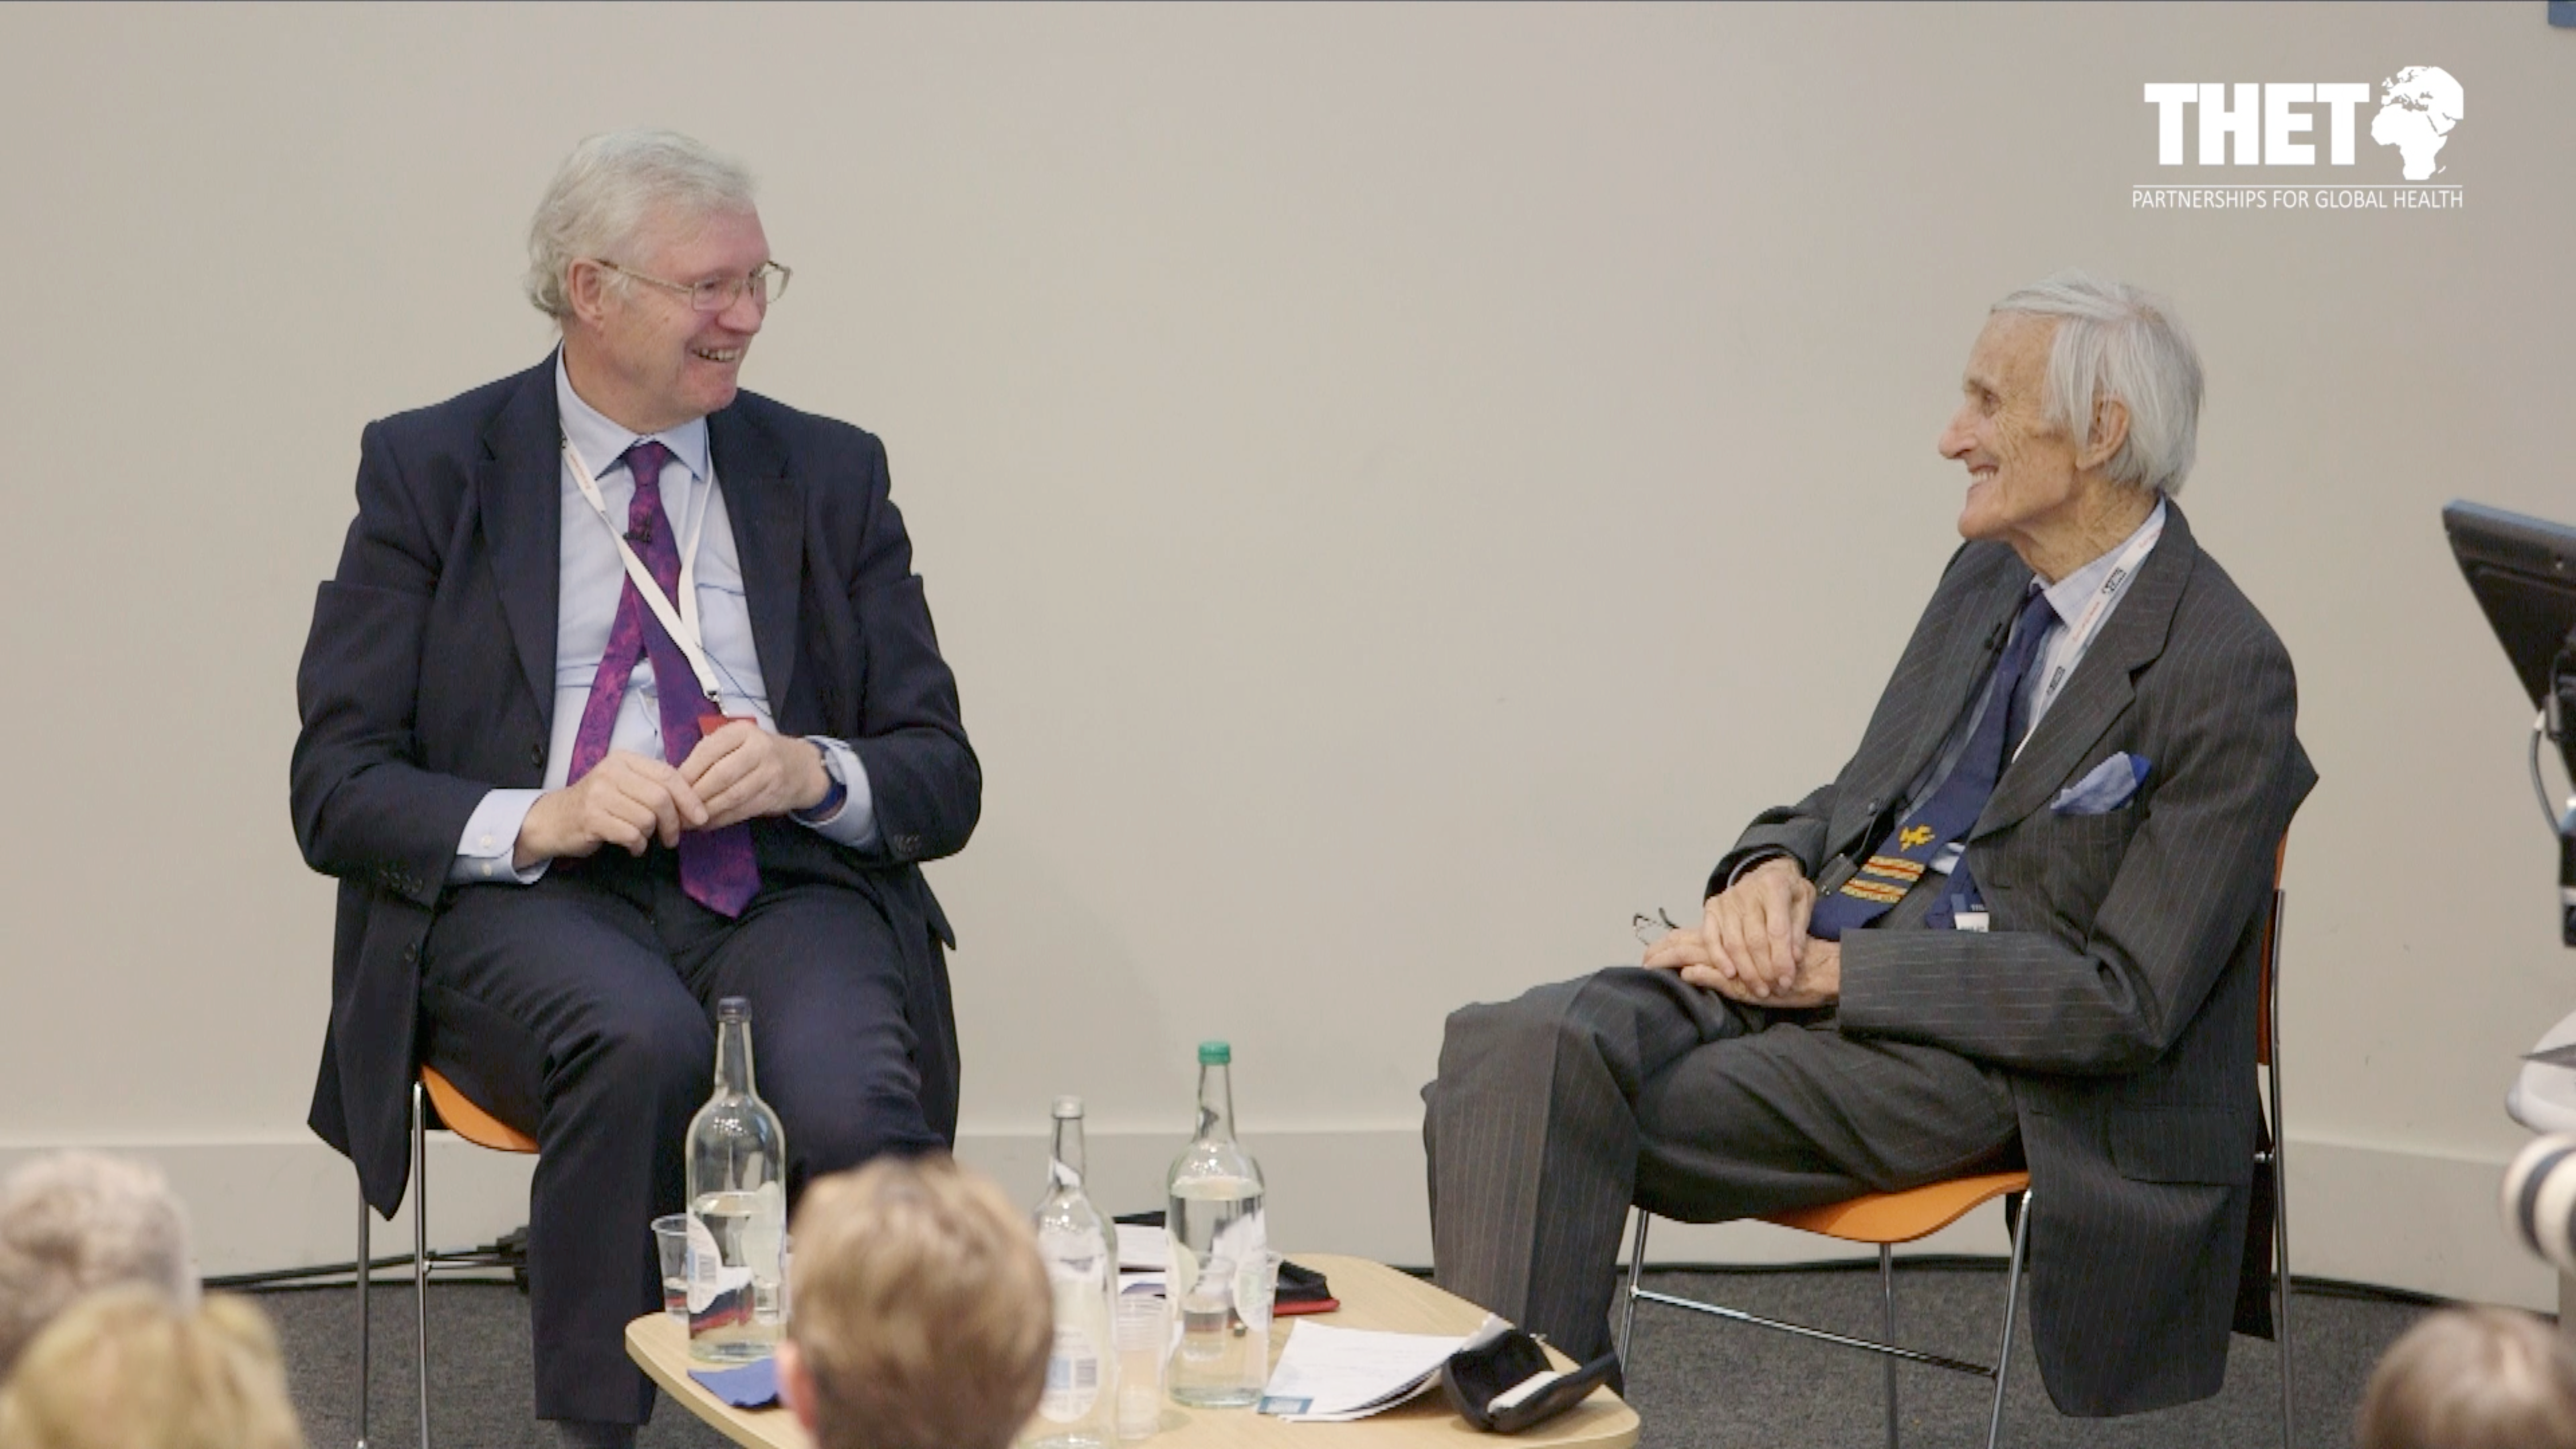 Panel Discussion Between Sir Eldryd Parry and Lord Nigel Crisp (the end of THET Conference 2018)